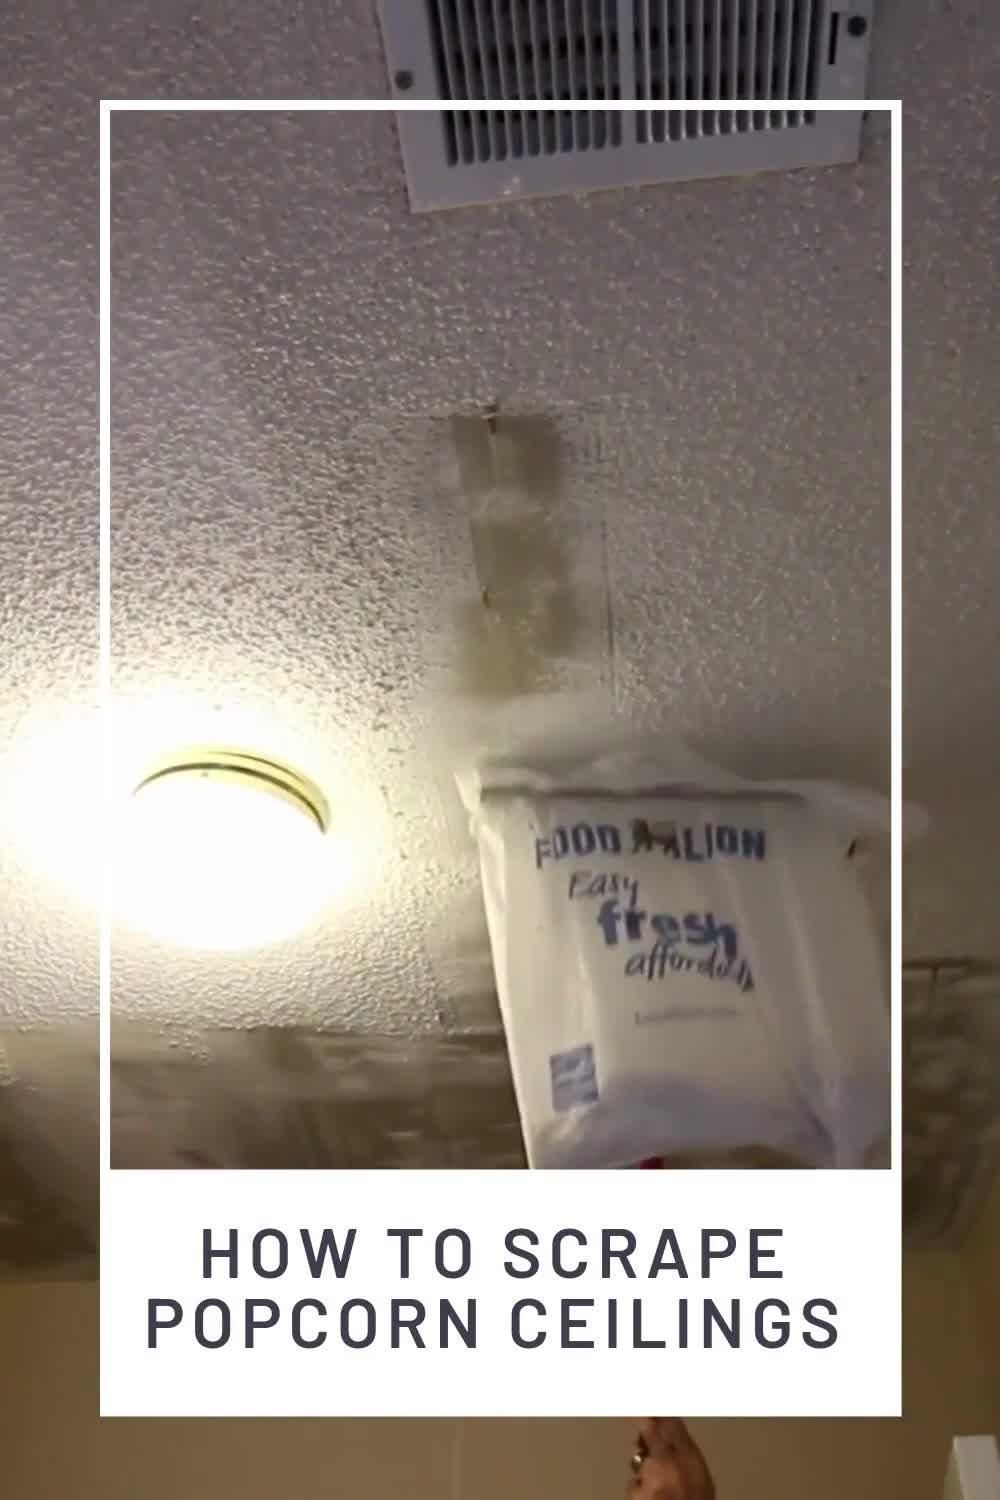 Our Top Tips on How to Scrape Popcorn Ceilings - Our Top Tips on How to Scrape Popcorn Ceilings -   19 diy House improvements ideas